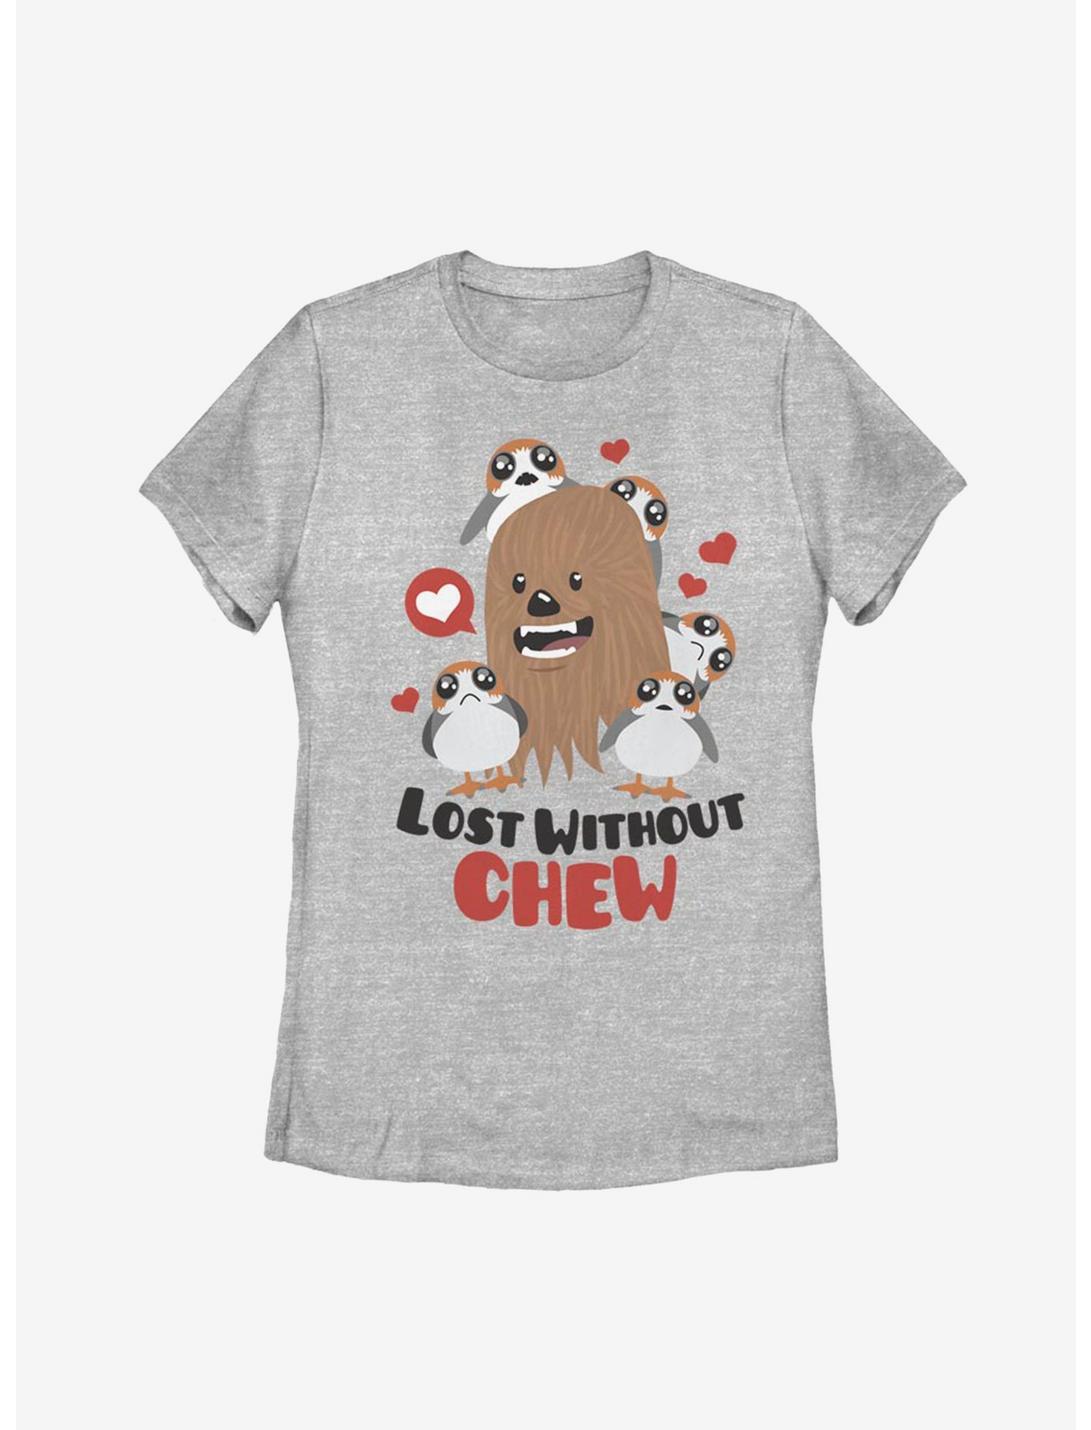 Star Wars Without Chew Womens T-Shirt, ATH HTR, hi-res